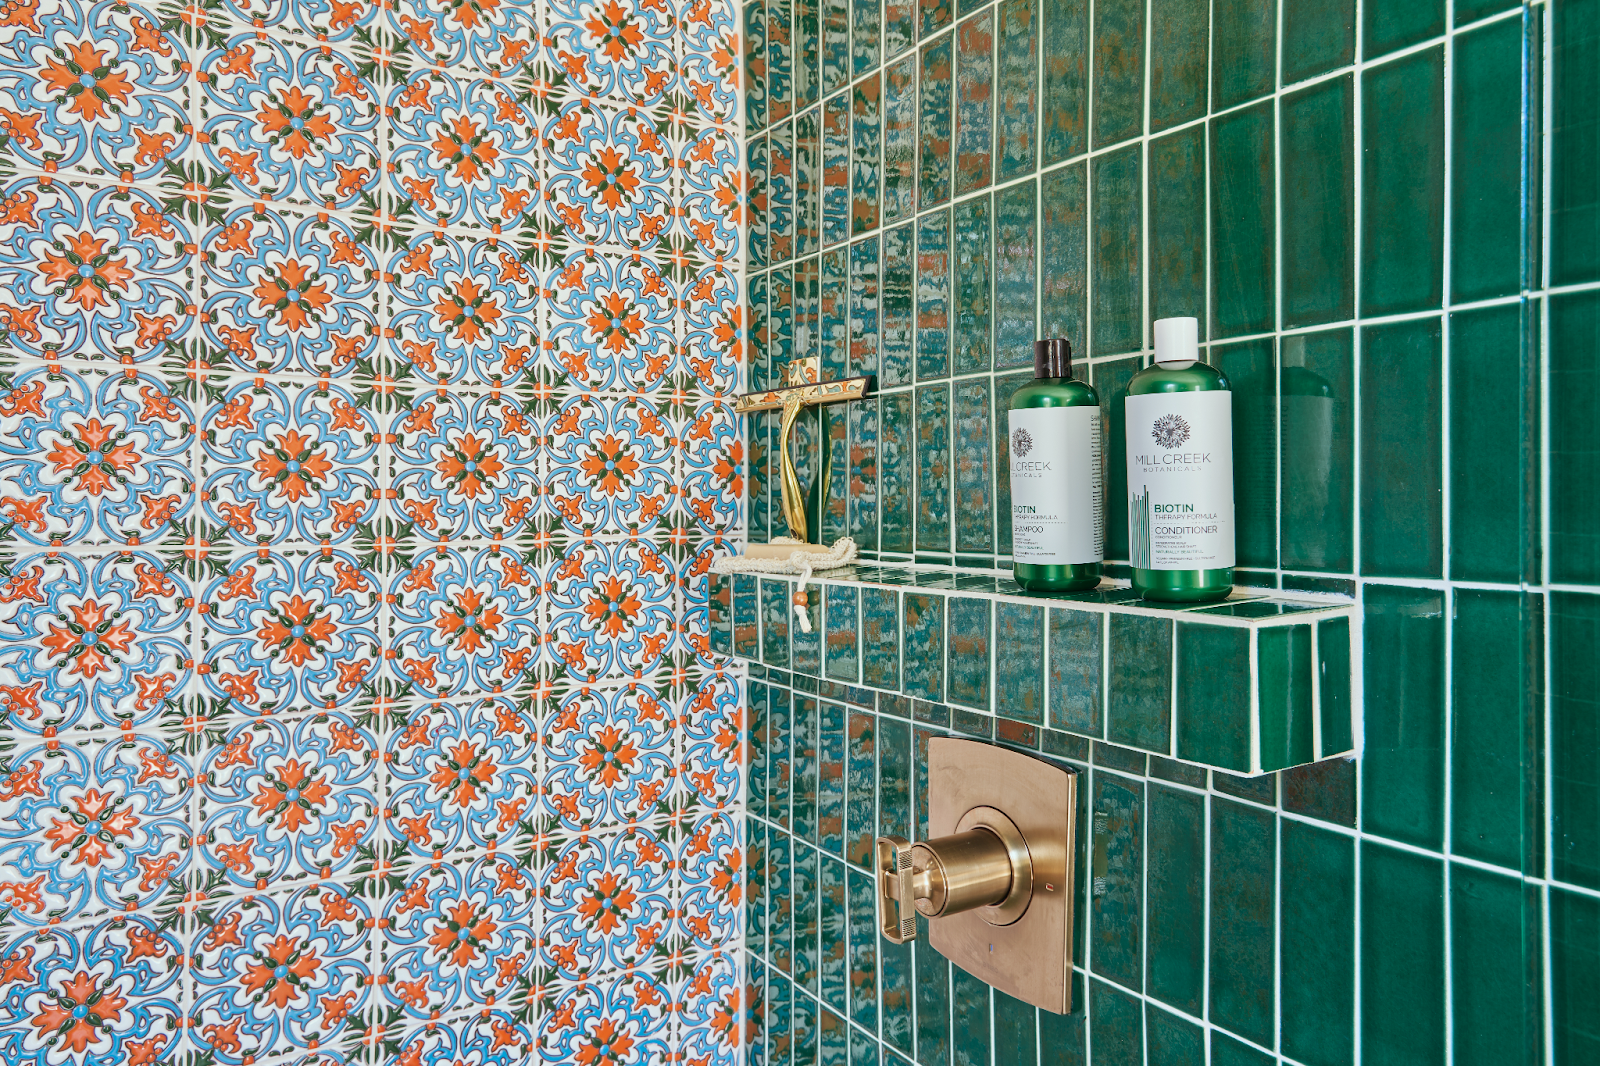 Modern bathroom design with green and hand painted tiles